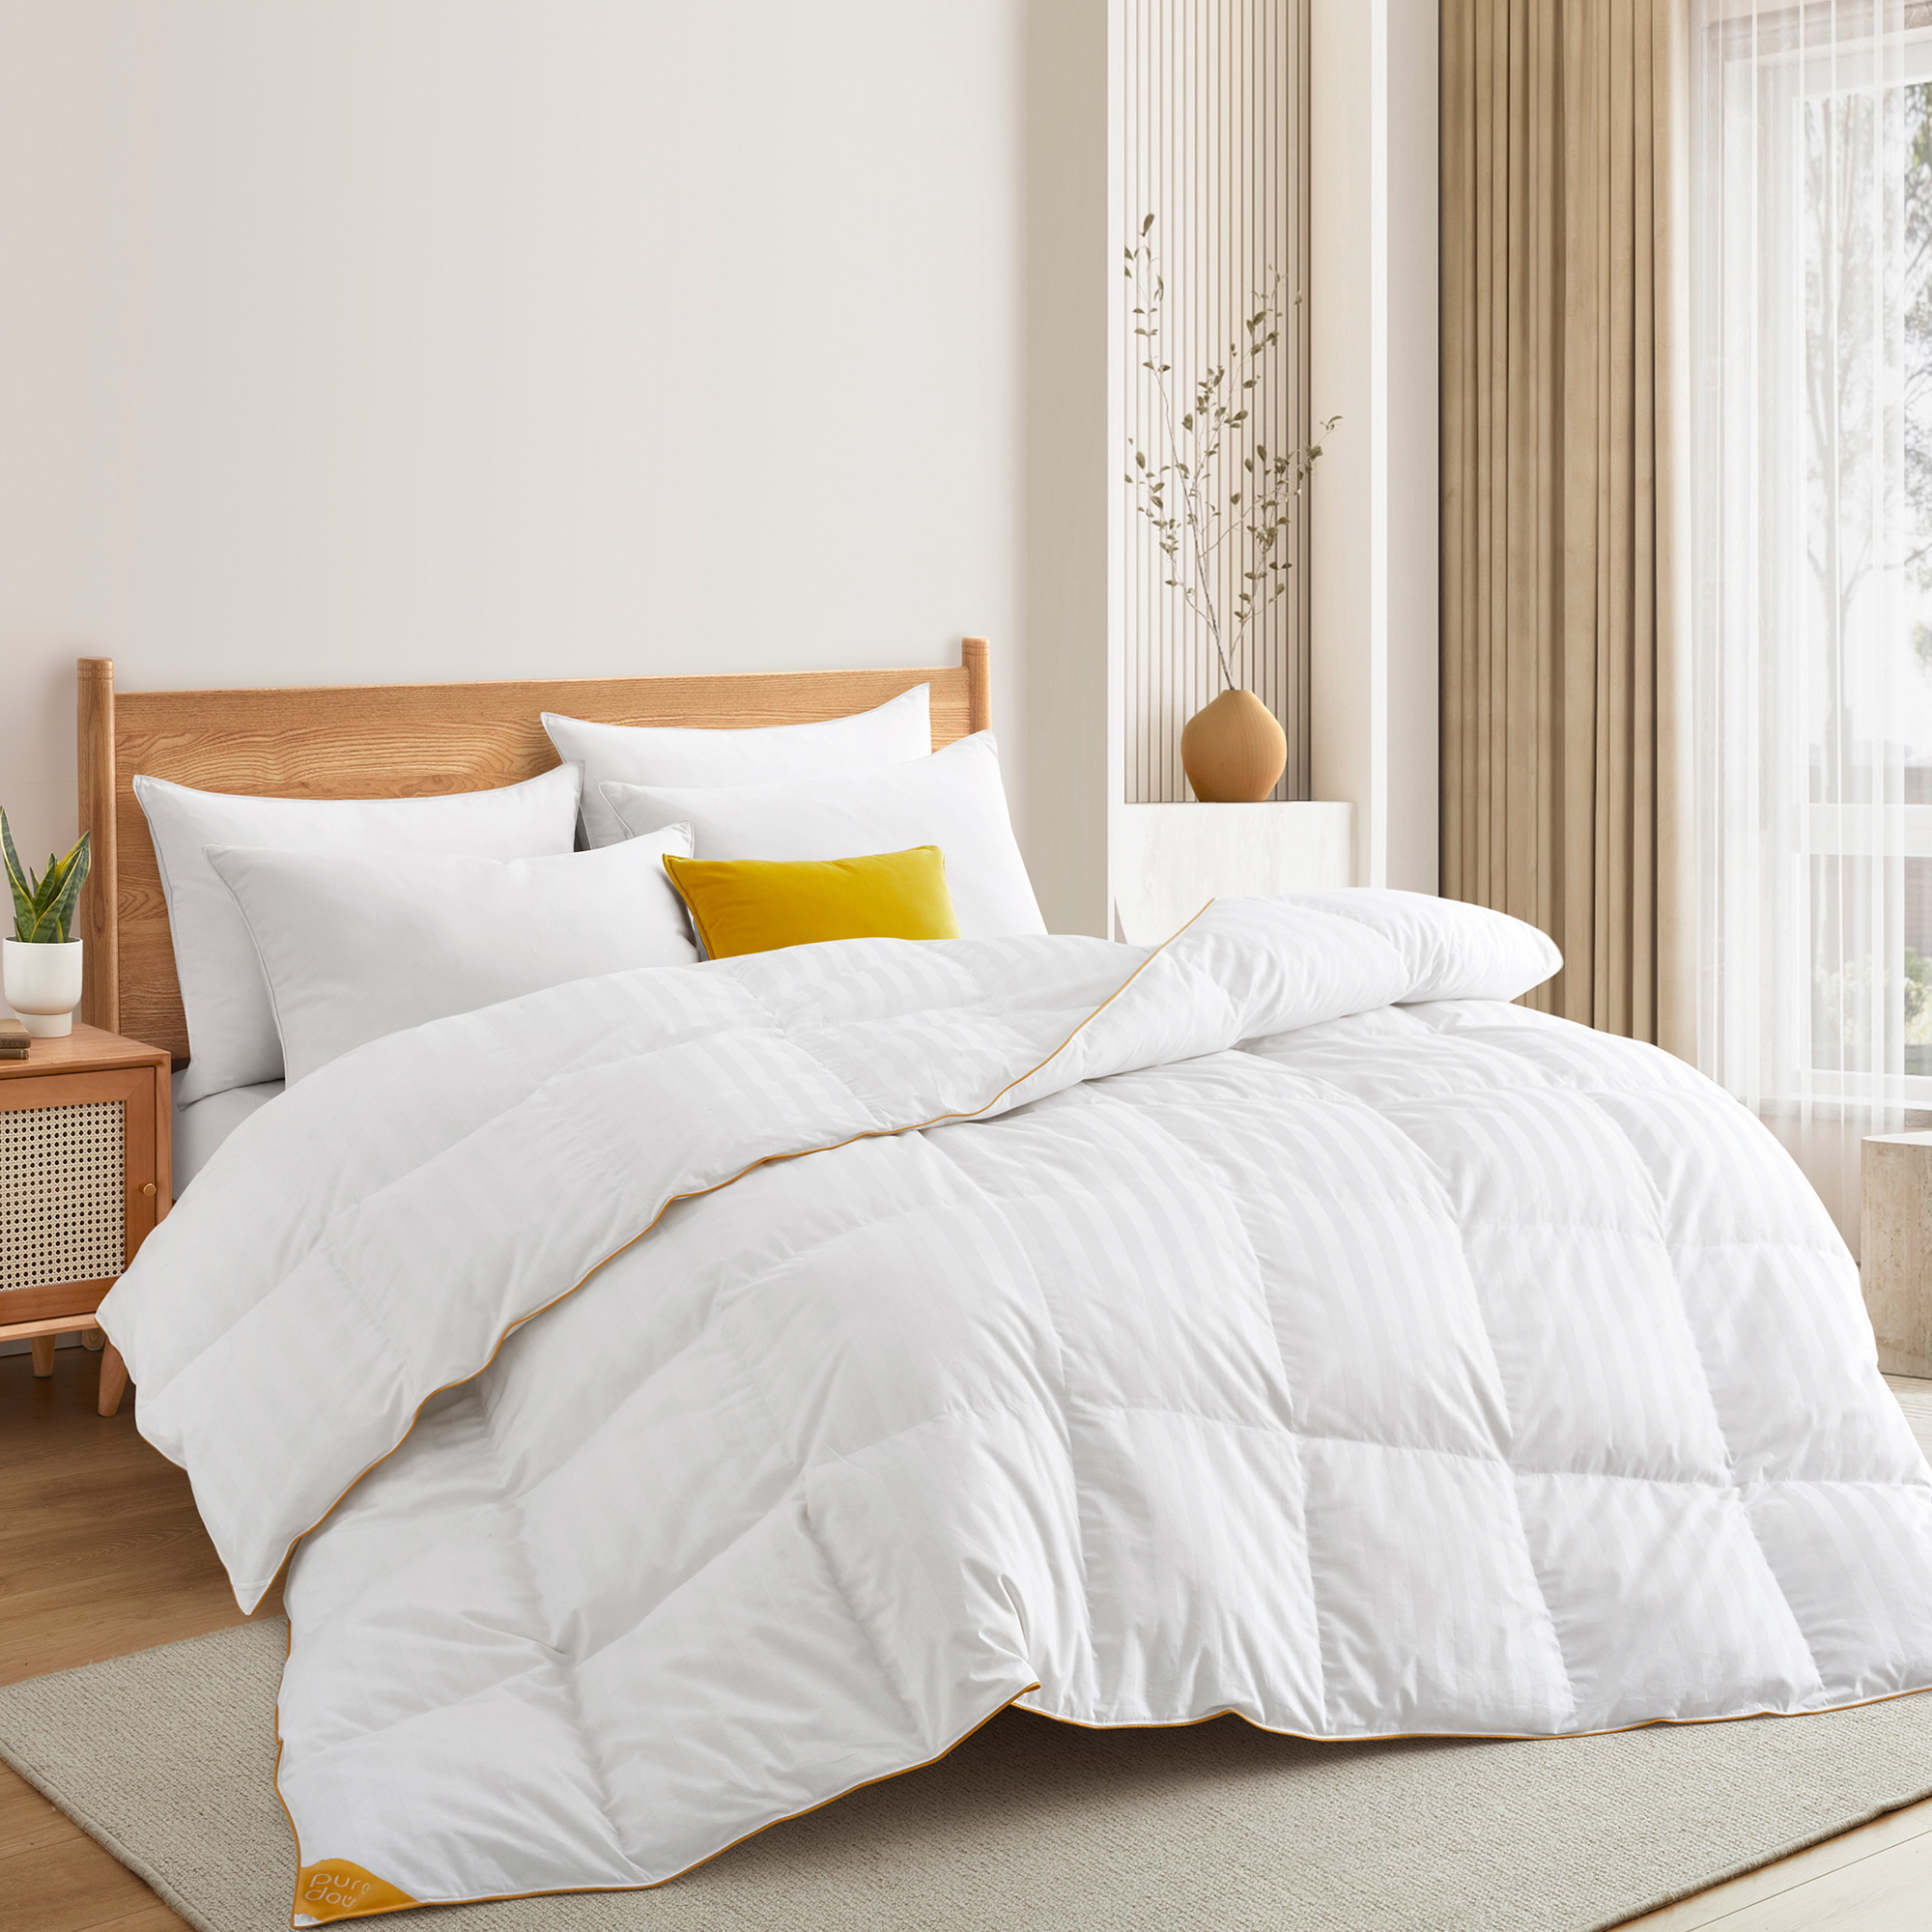 500 TC White Goose Down Feather All Season Comforter Breathable Cotton Cover, Baffled Box Duvet Insert - King-106*90